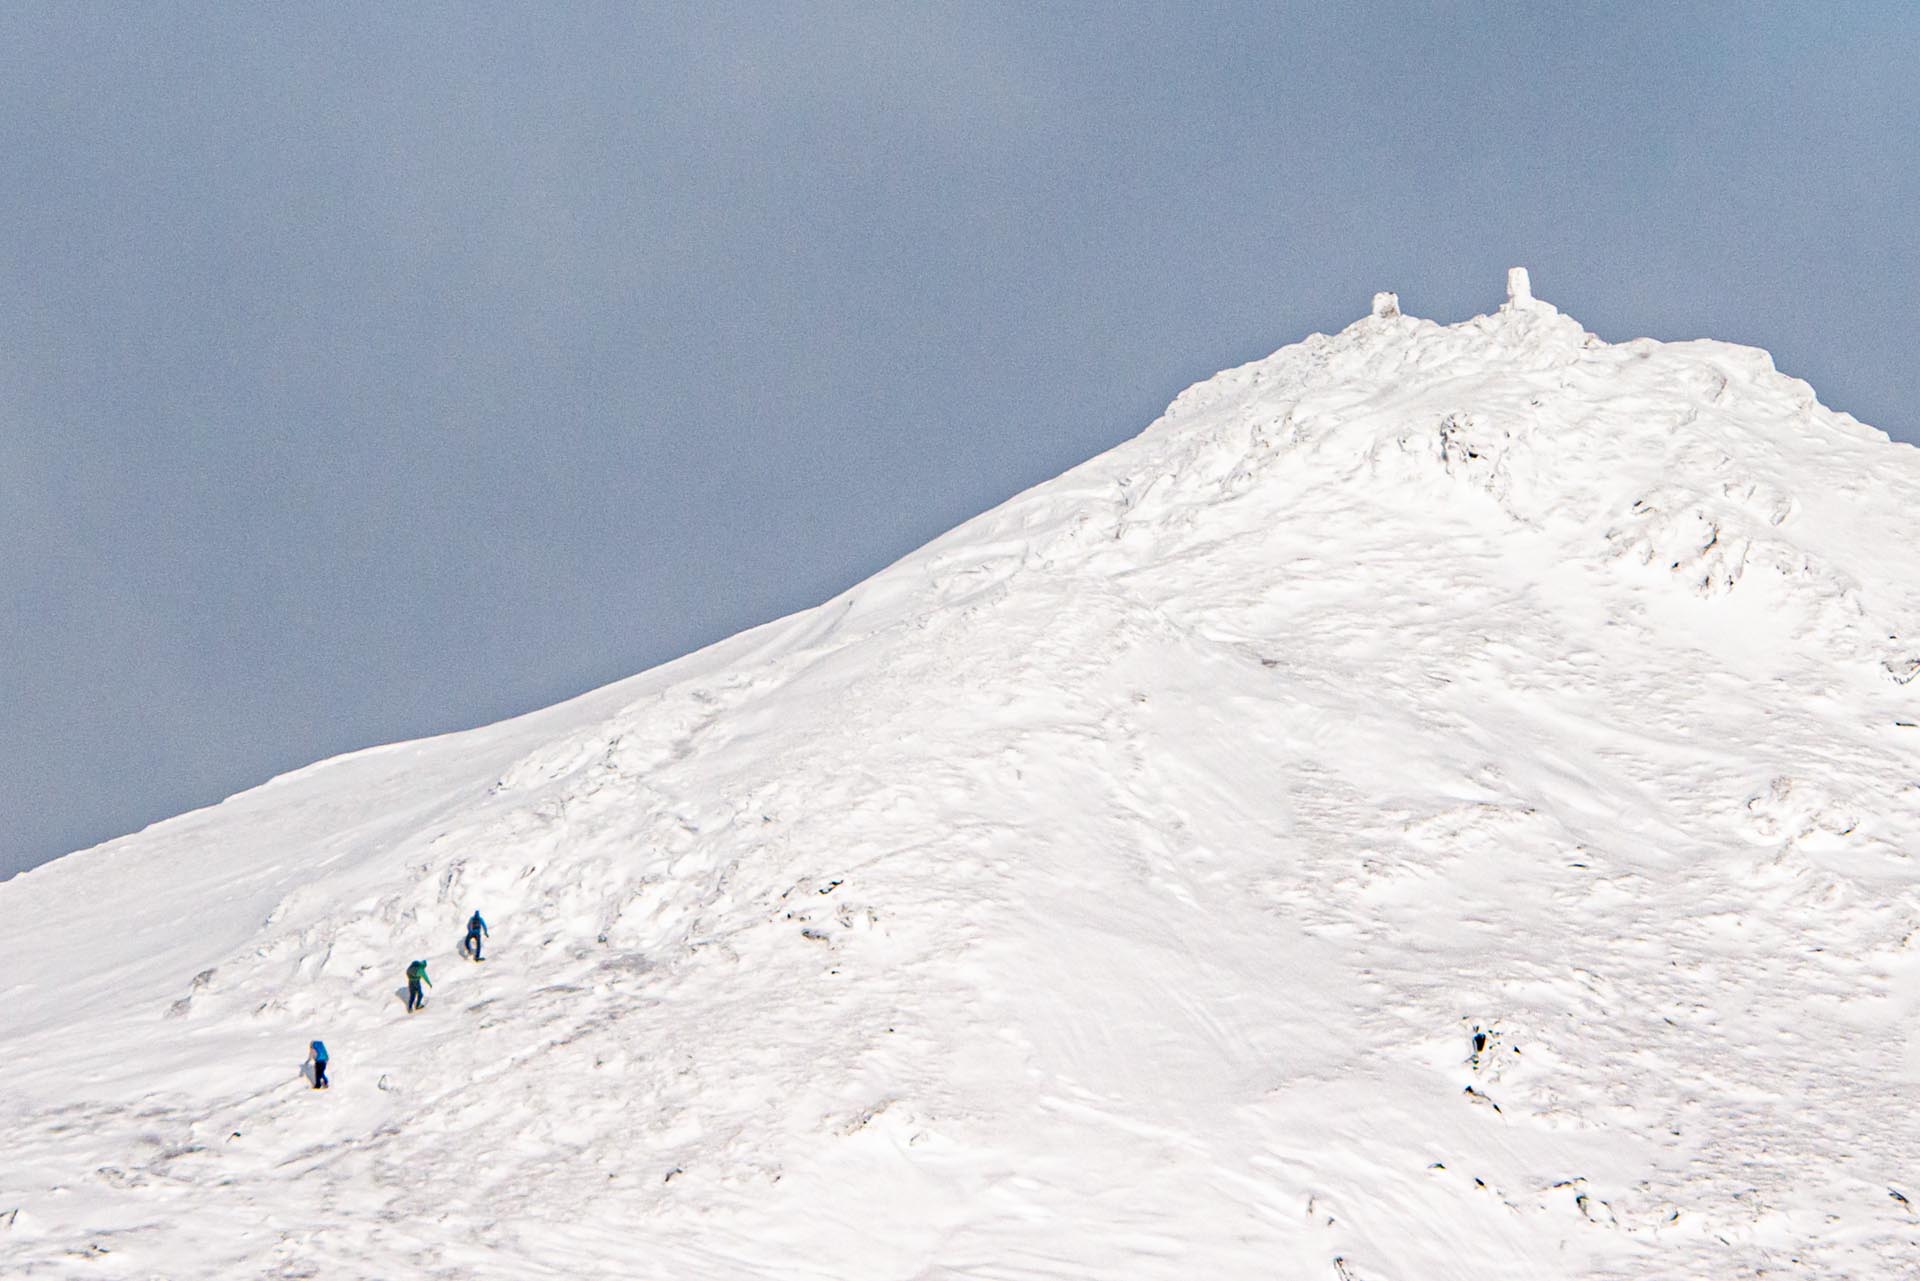 Andrew King Mountain photography 200.0 mm Ben Lawers hill-walkers cameras